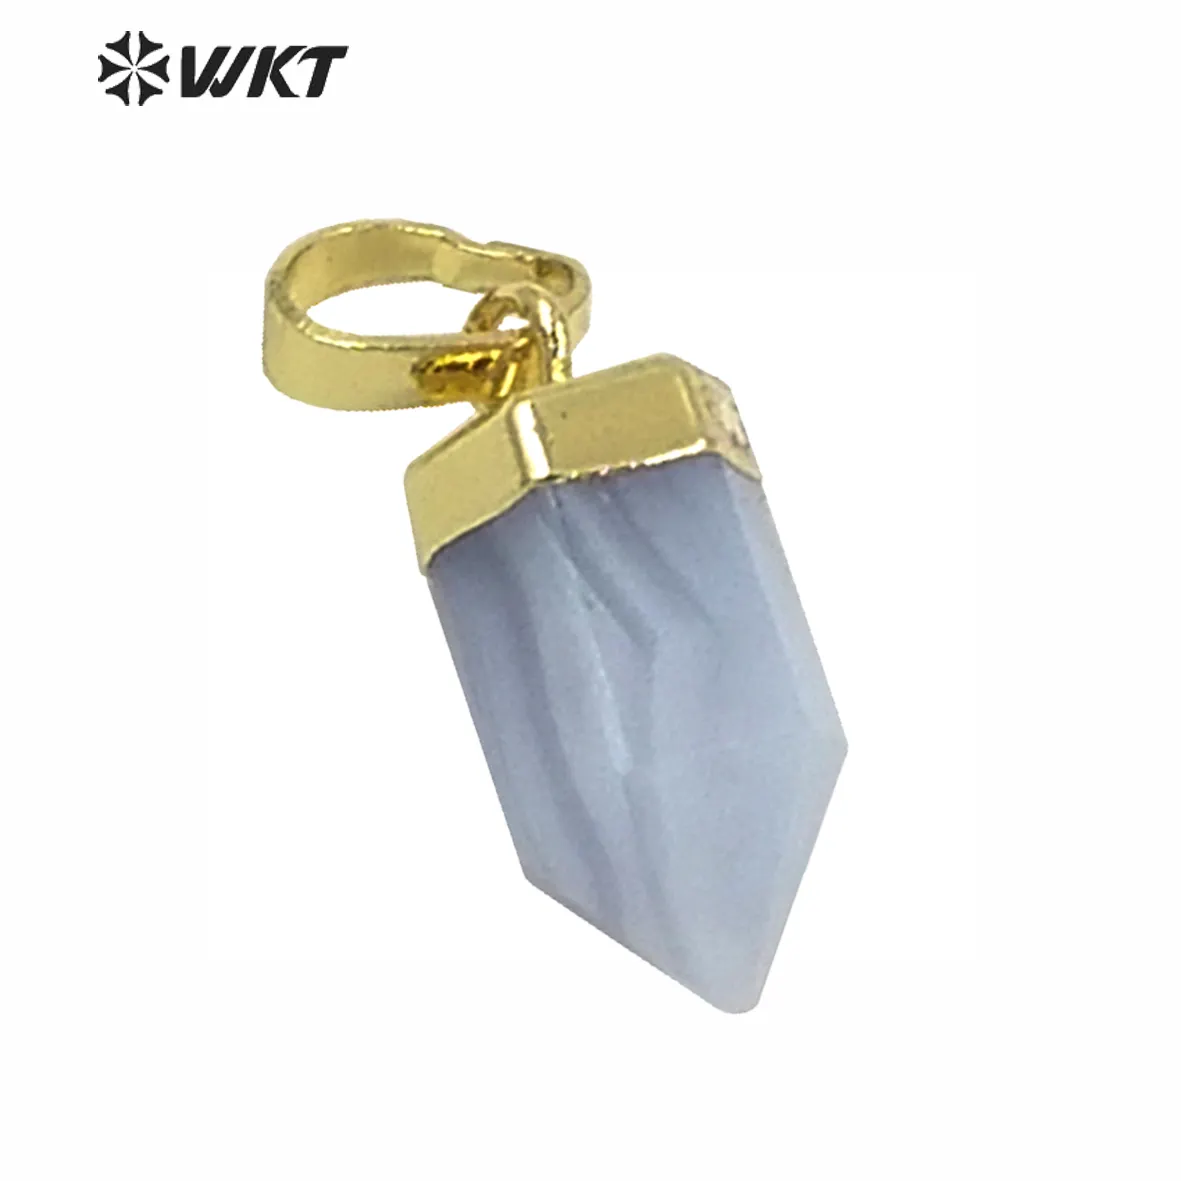 WT-P1334 WKT Wholesale Bullet Shape Tiny ExquiSite Blue Agate 24k Real Gold Silver Plated Natural Stone pendant